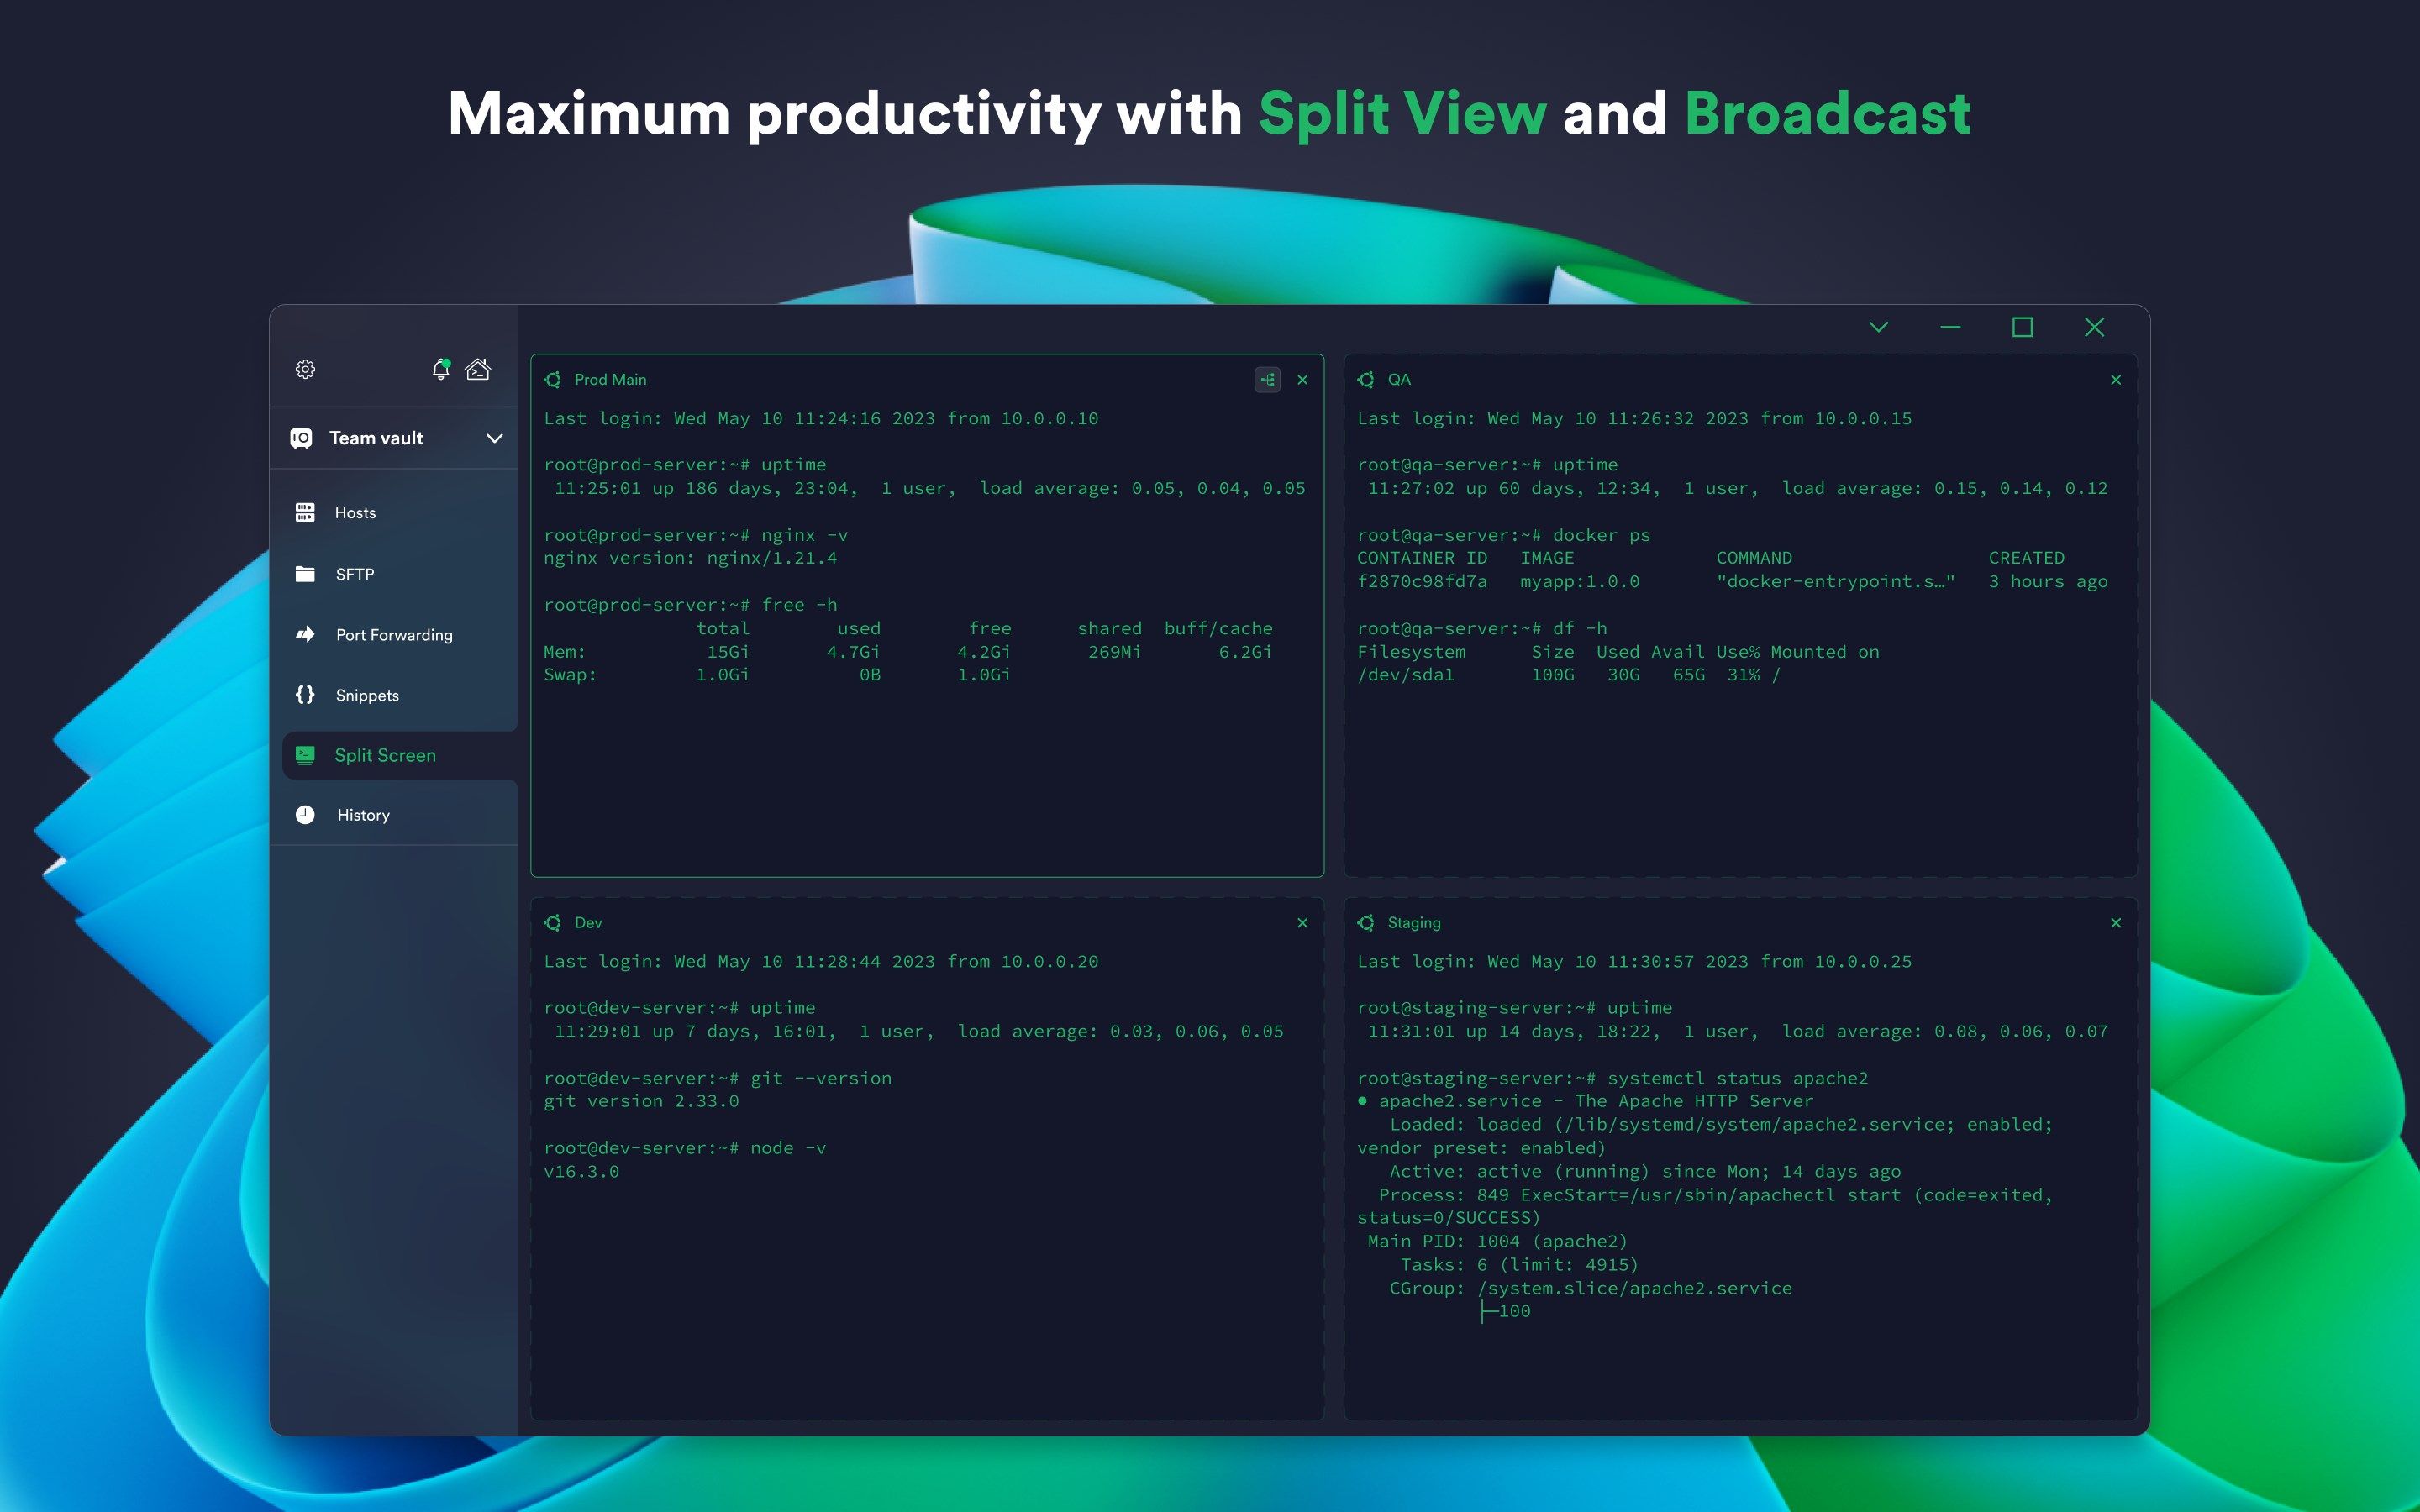 Maximum productivity with Split View and Broadcast